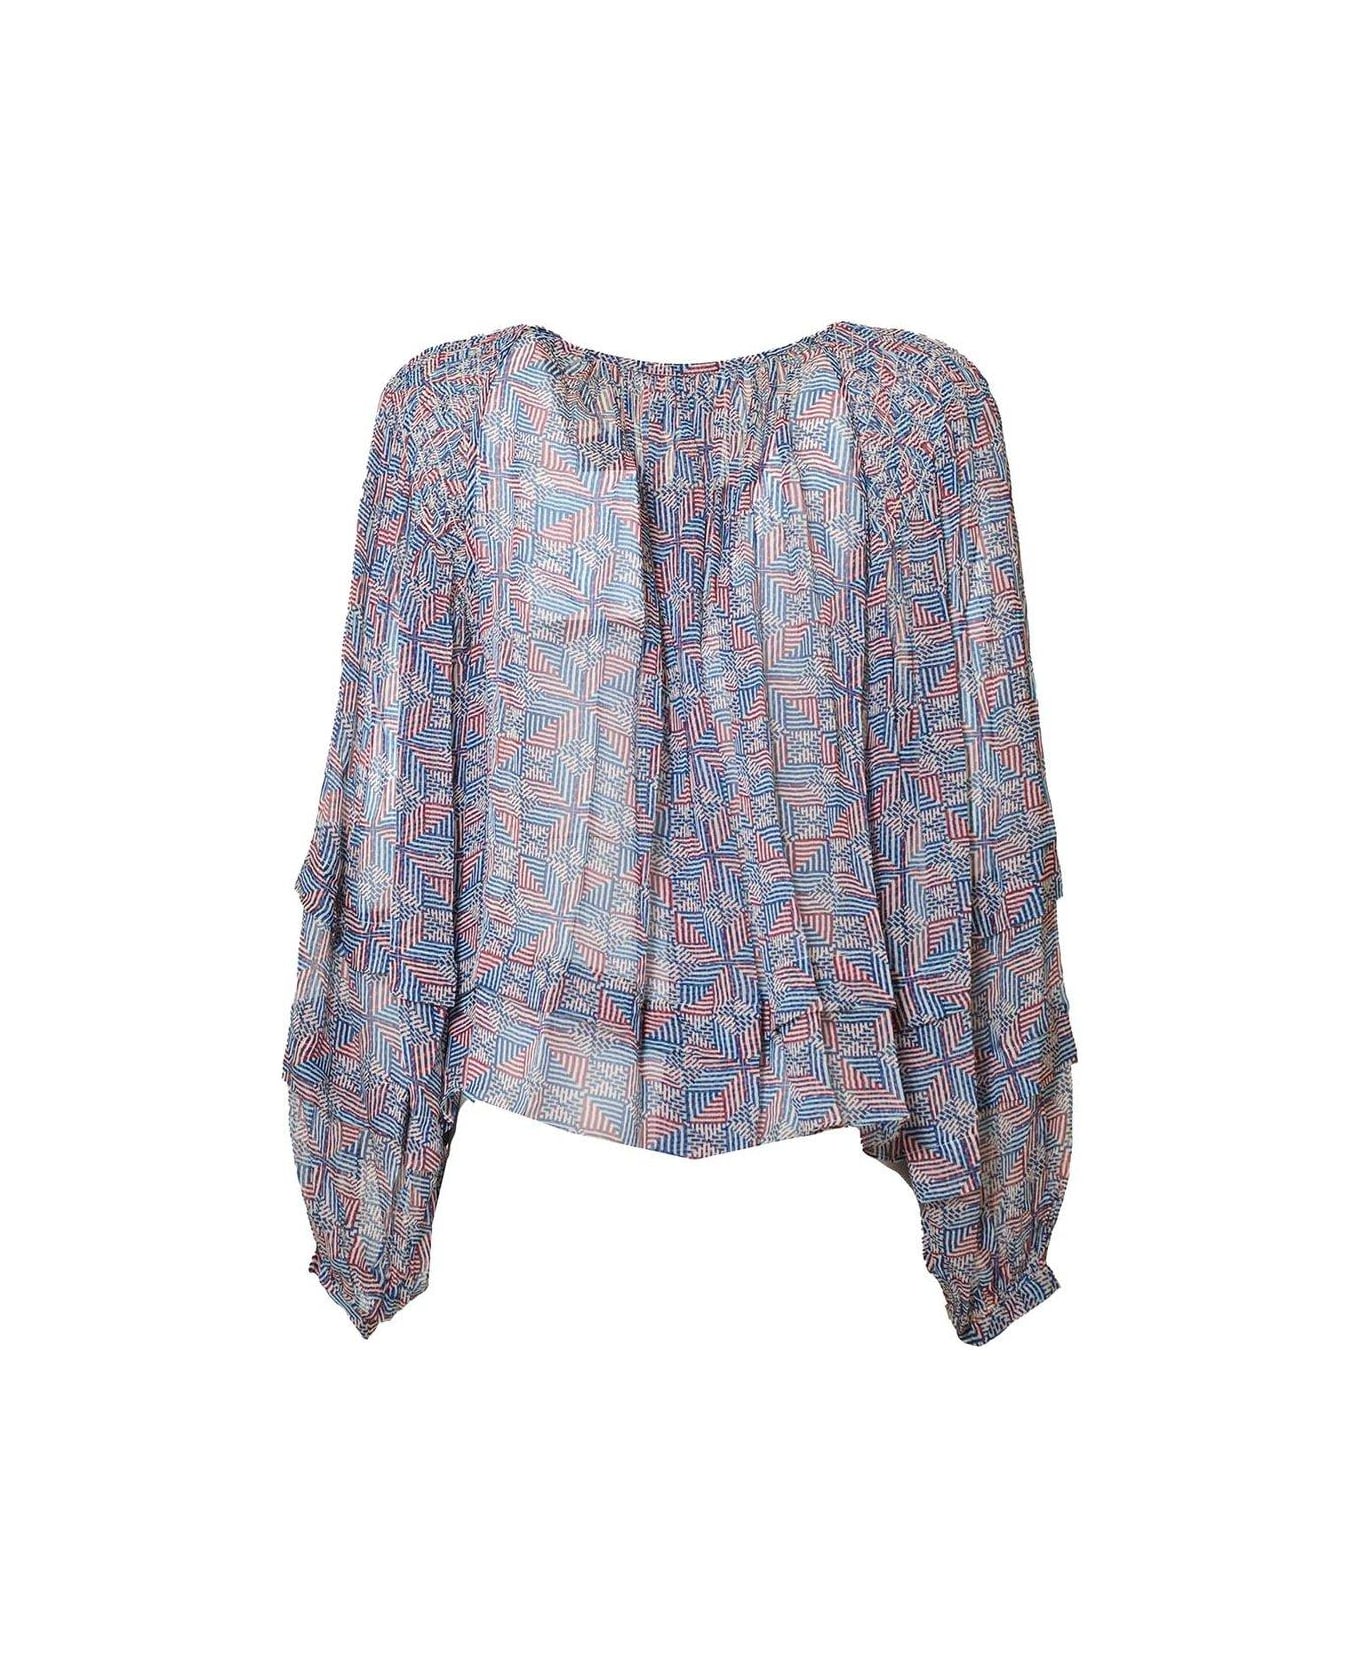 Isabel Marant Floral-printed Tie-neck Layered Blouse - Blu/rosso